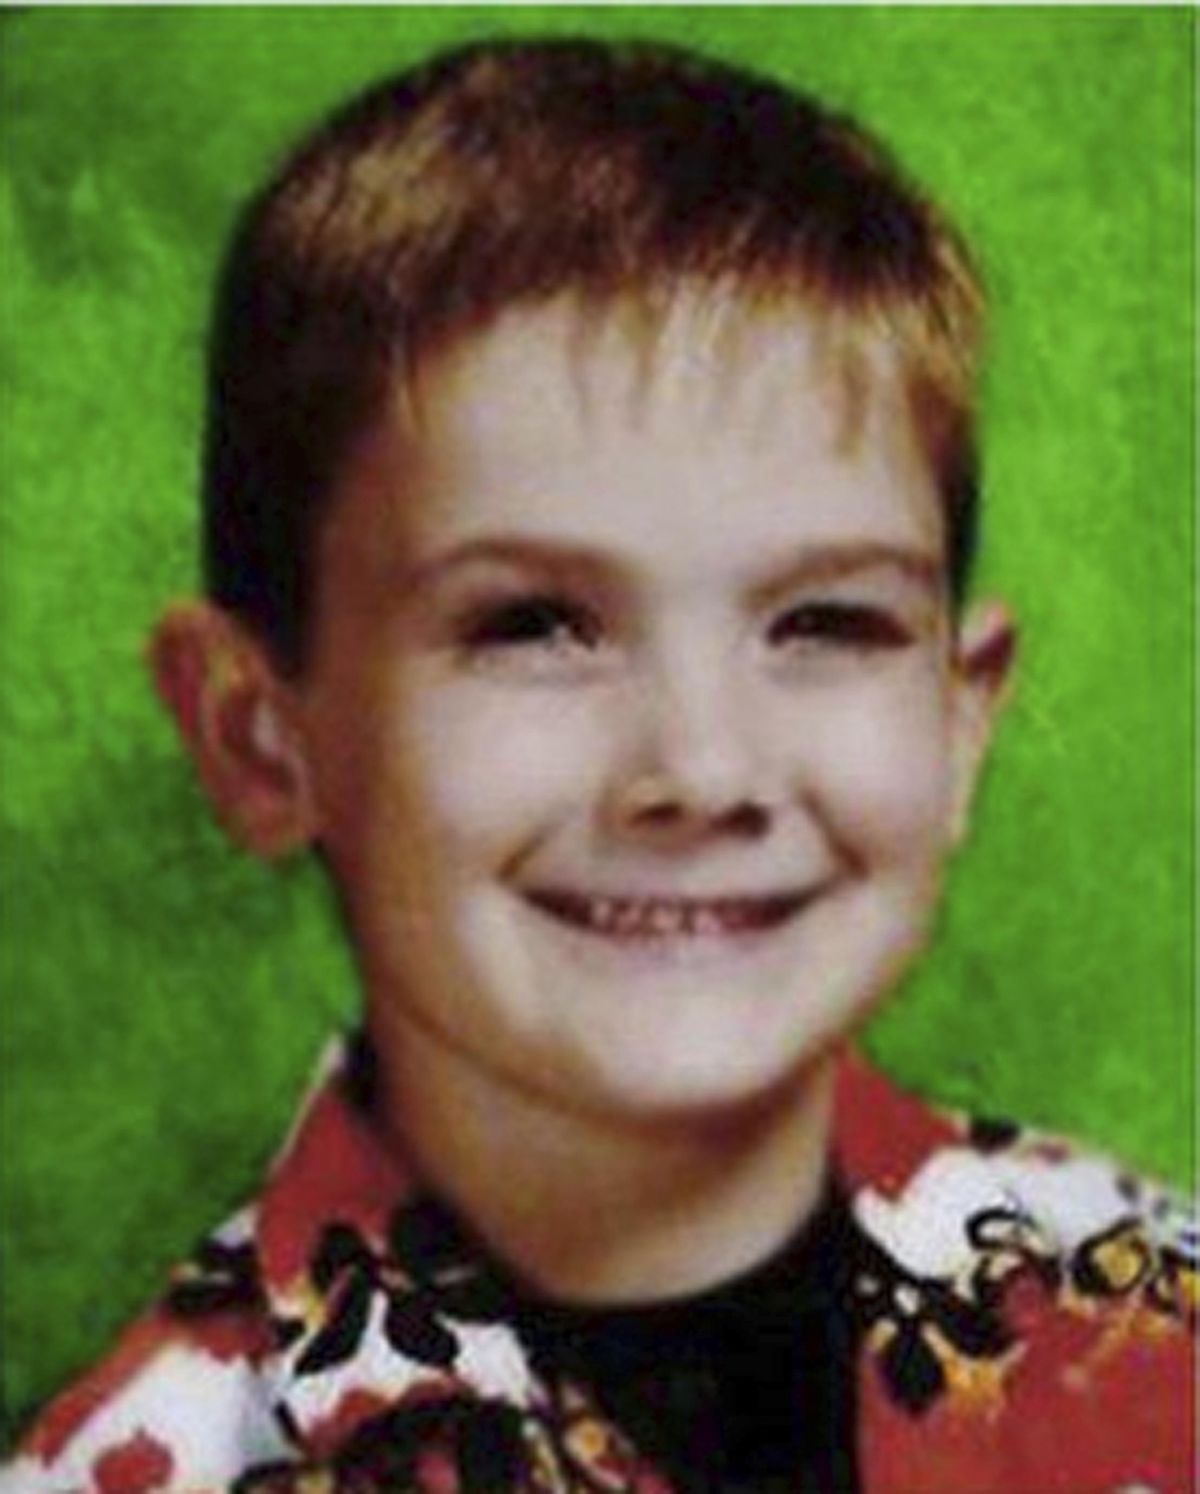 This undated photo provided by the Aurora, Ill., Police Department shows missing child, Timmothy Pitzen. The FBI announced Thursday, April 4, 2019, that DNA testing showed a teenager claiming to be Timmothy Pitzen is not him. (KS CA / Associated Press)